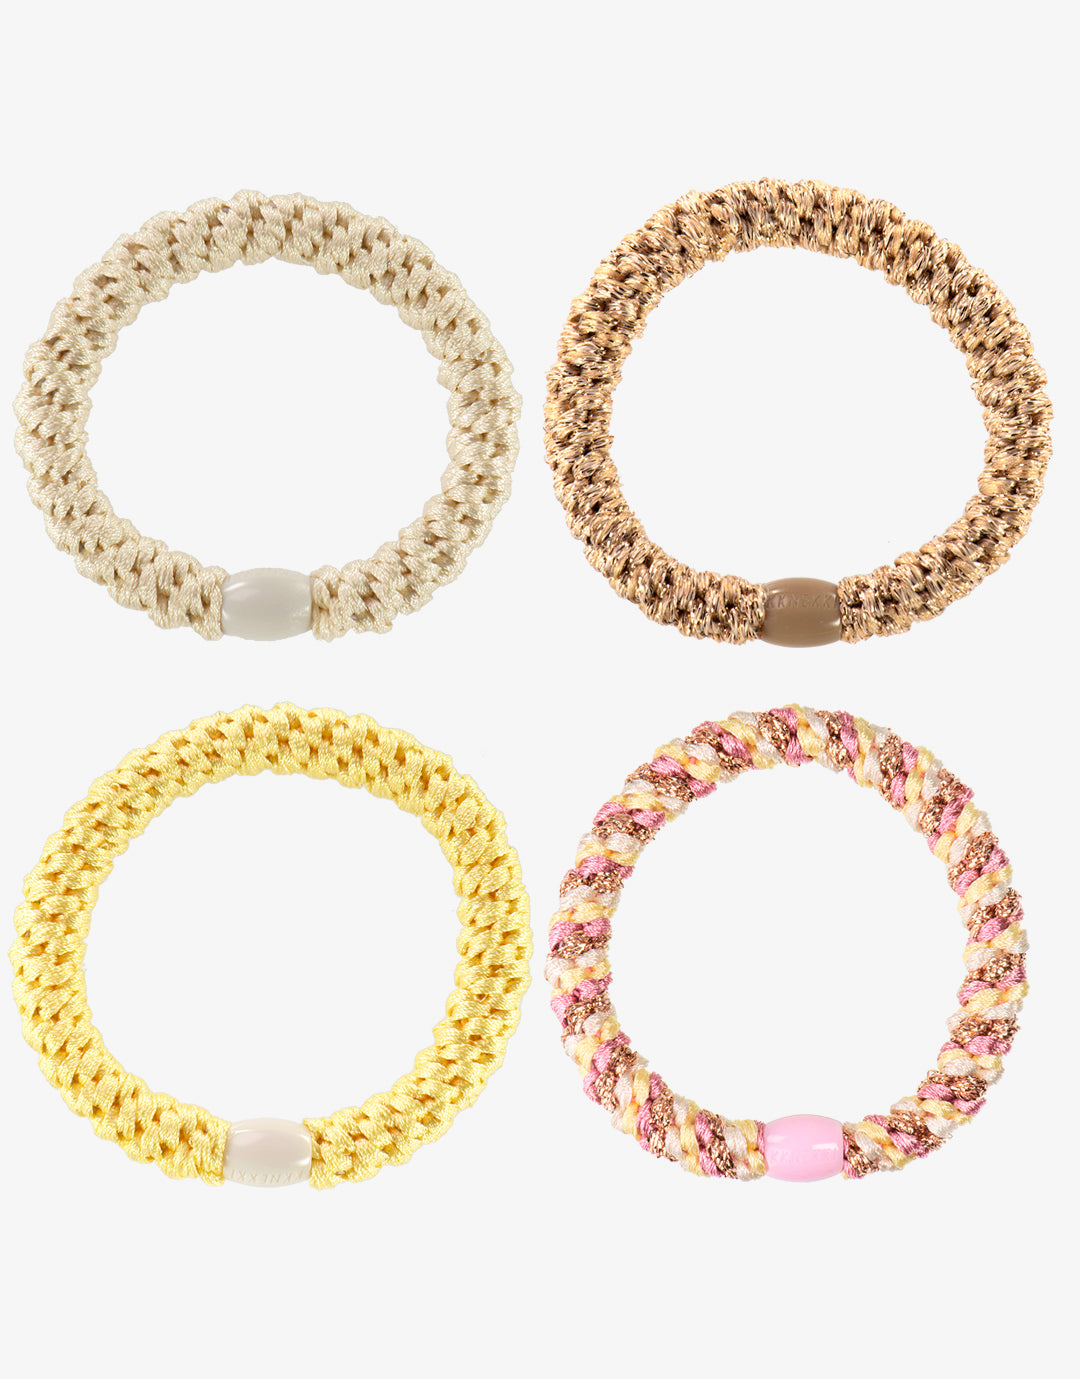 Original Hair Tie Bundle - Pale Golds, Yellow and Pink Mix - Simply Beach UK